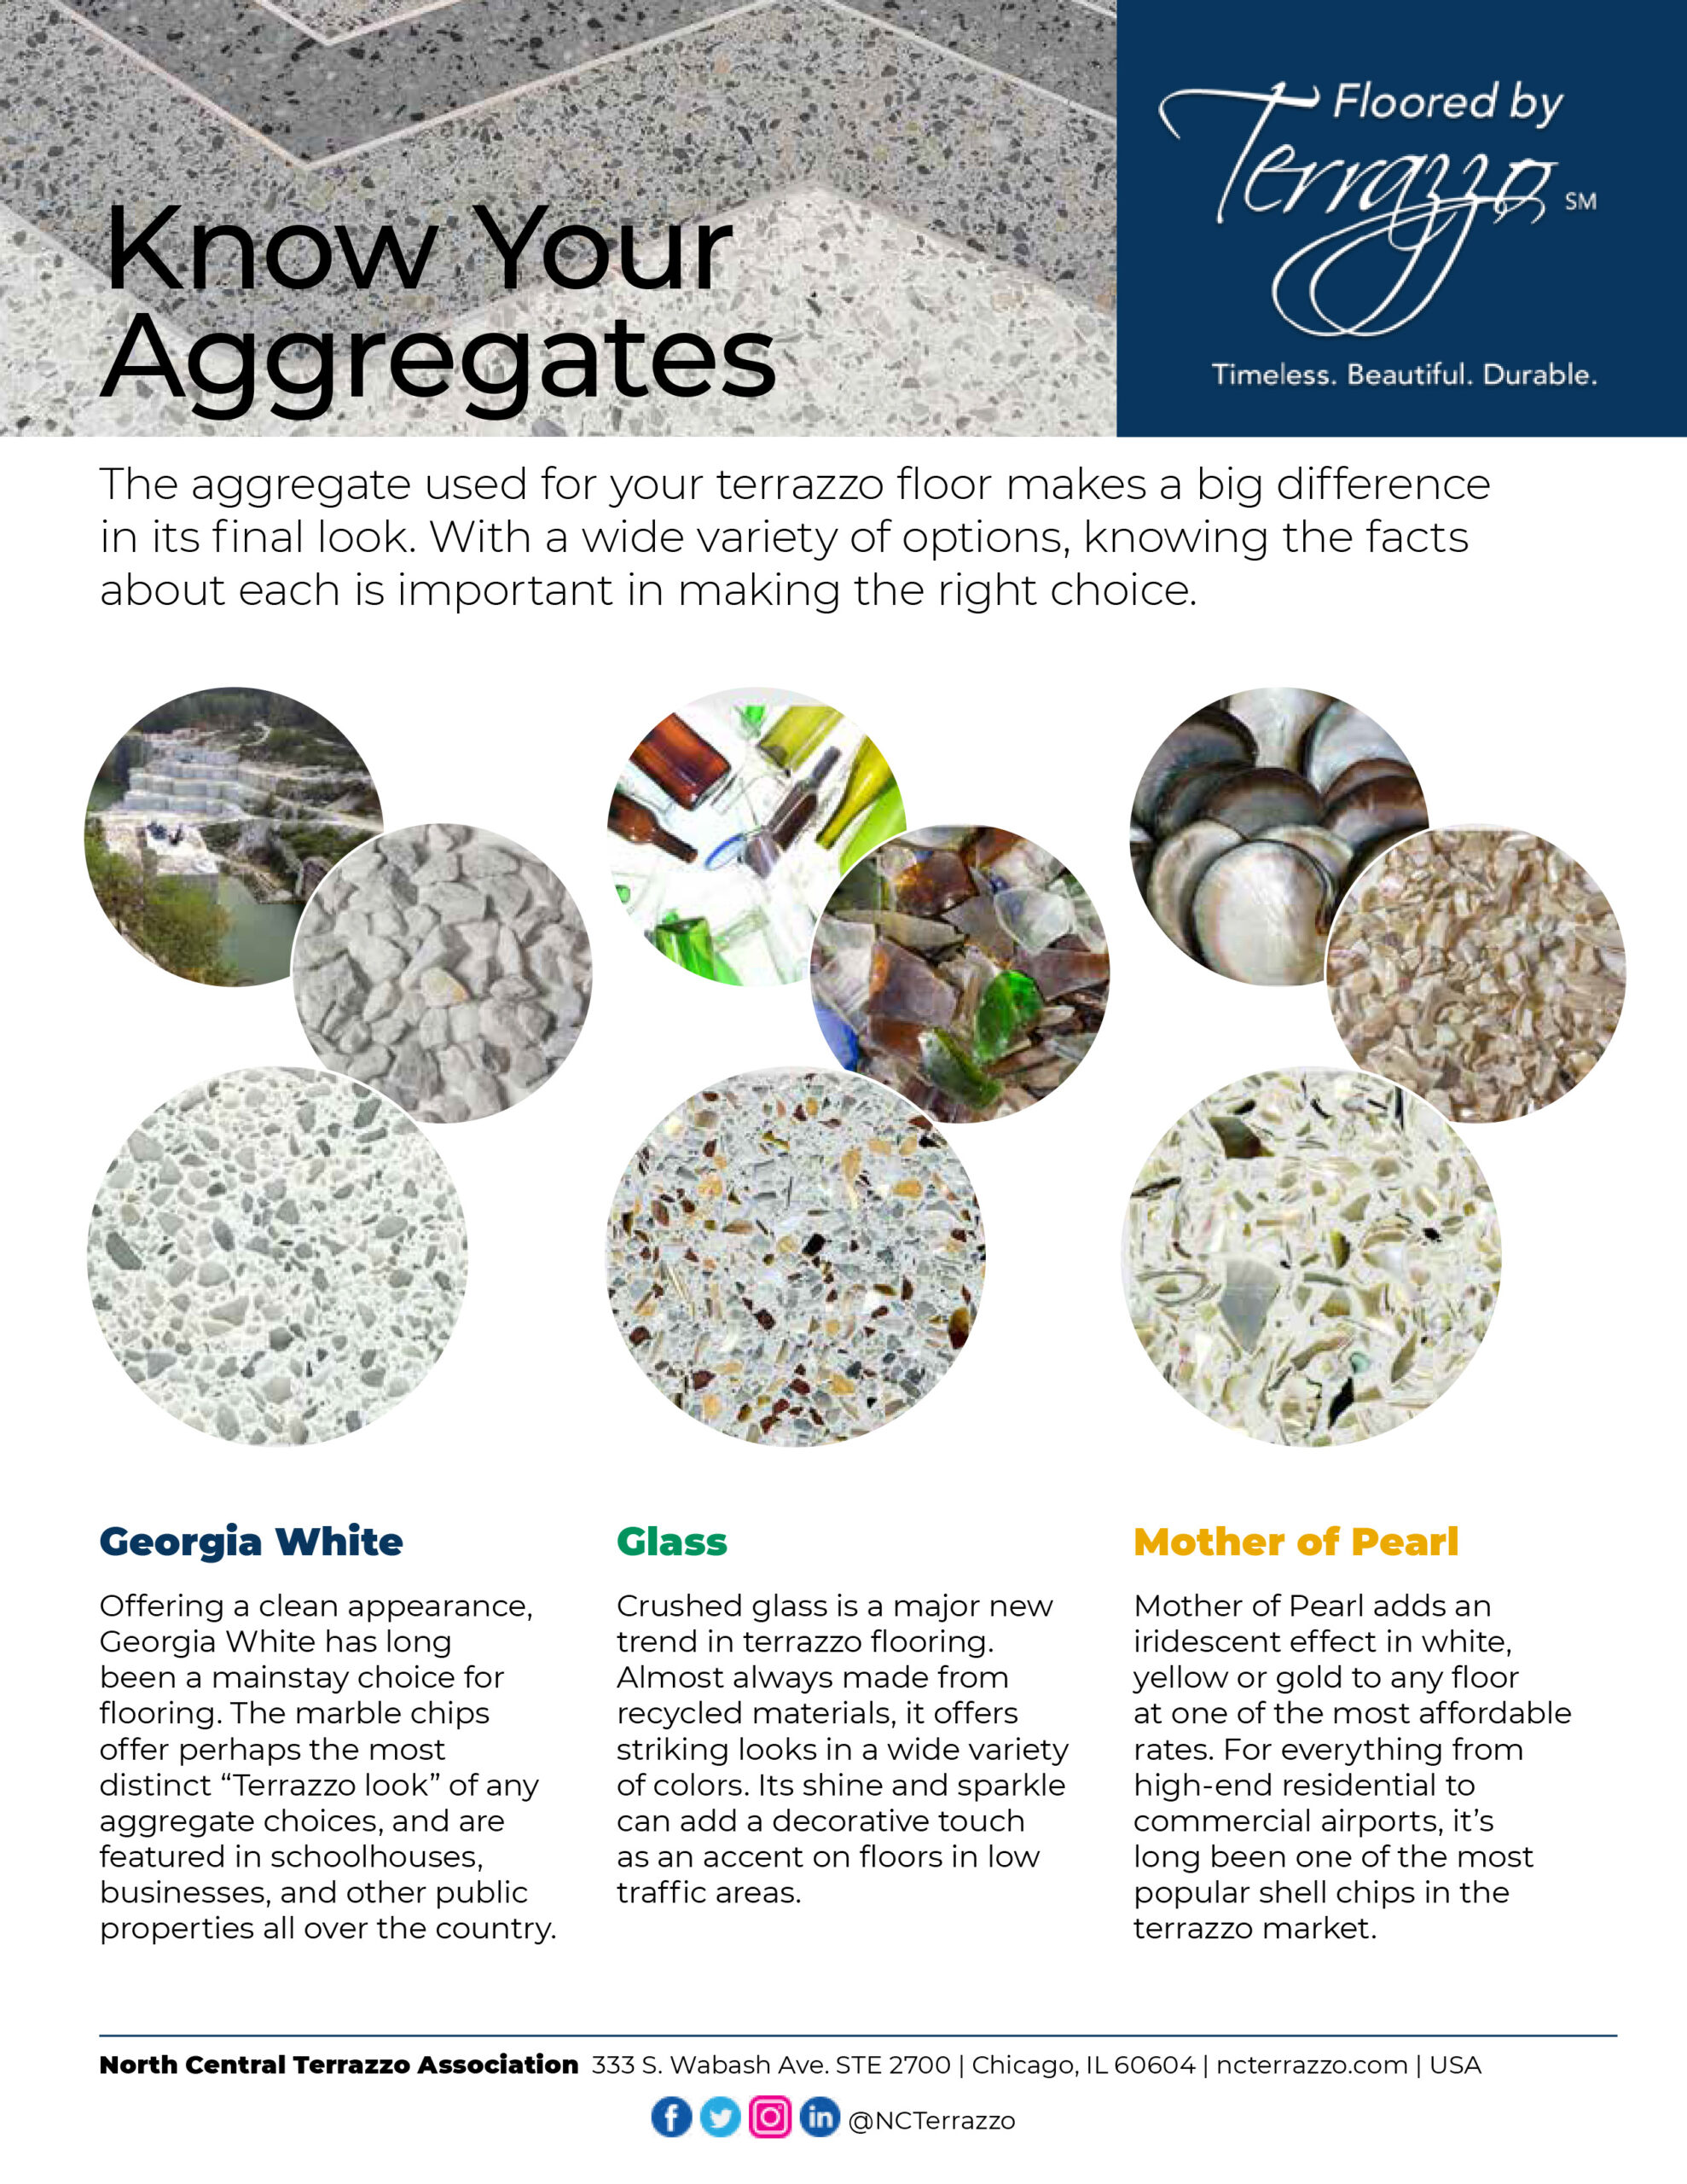 Know Your Aggregates